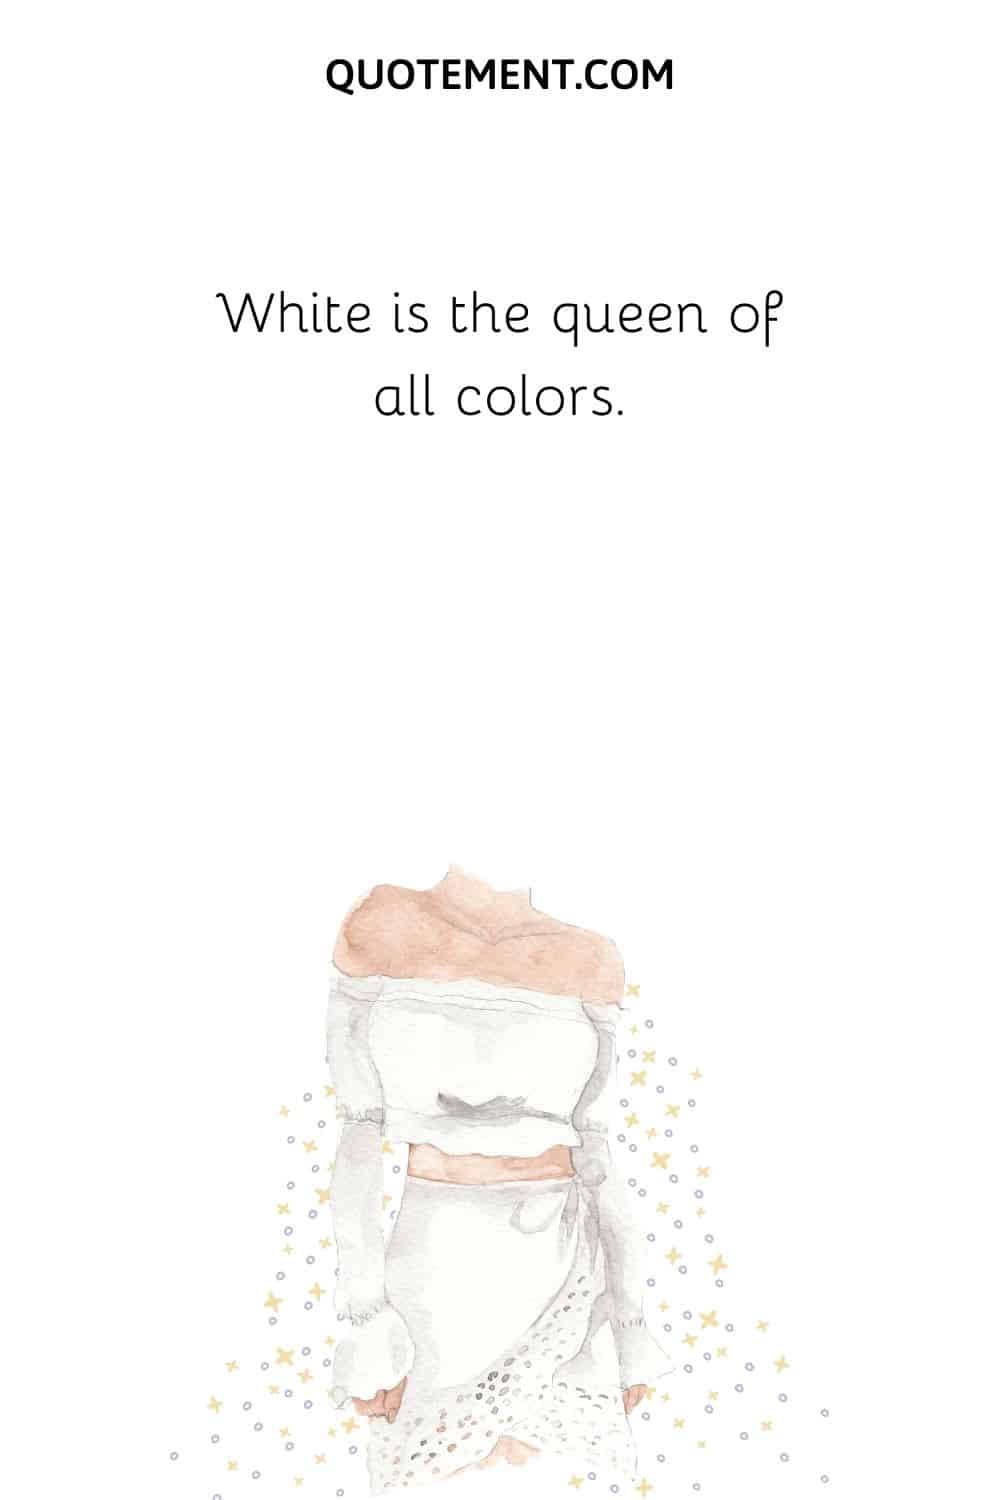 White is the queen of all colors.